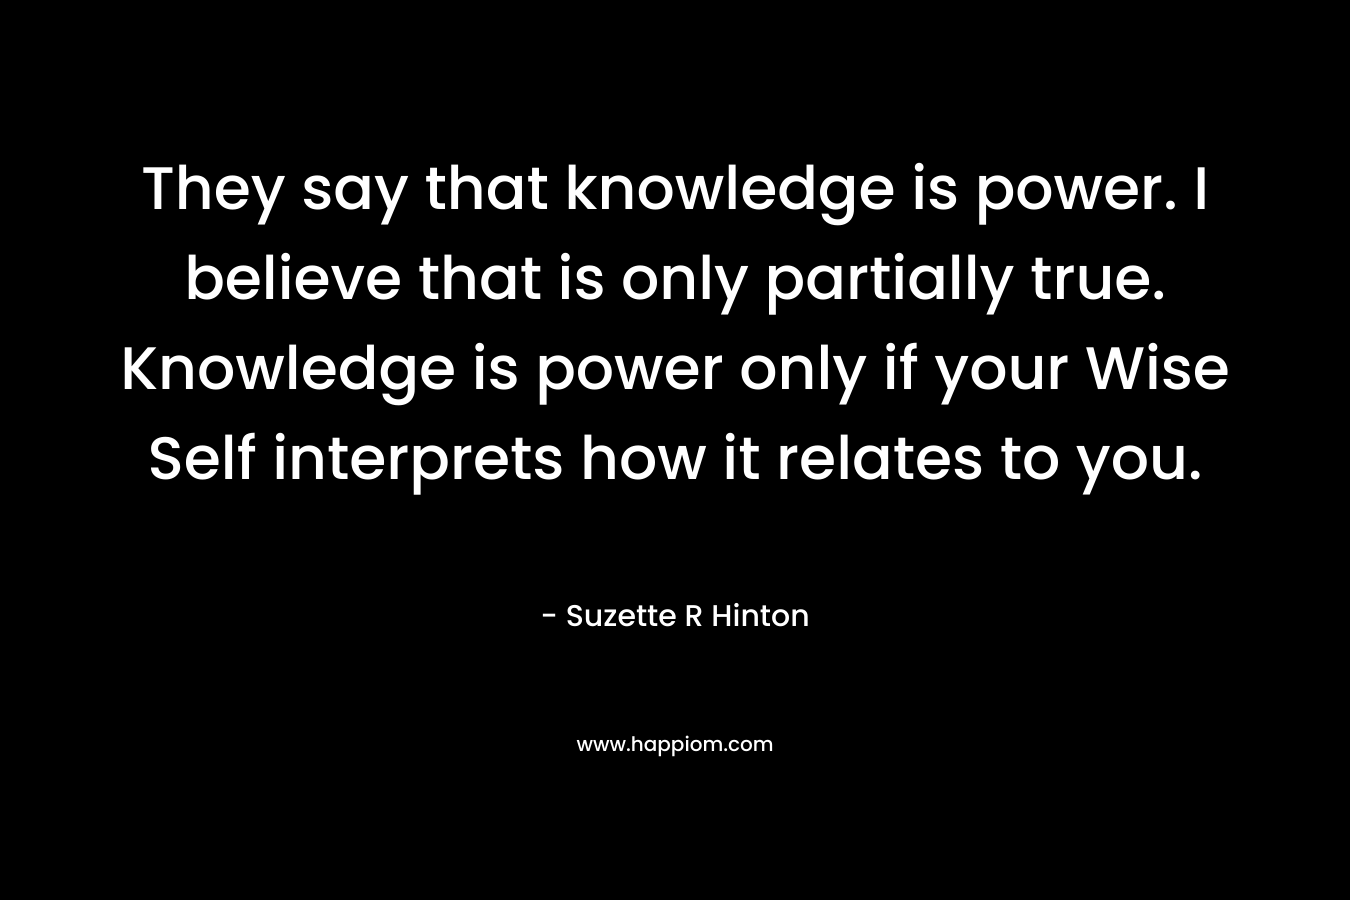 They say that knowledge is power. I believe that is only partially true. Knowledge is power only if your Wise Self interprets how it relates to you.